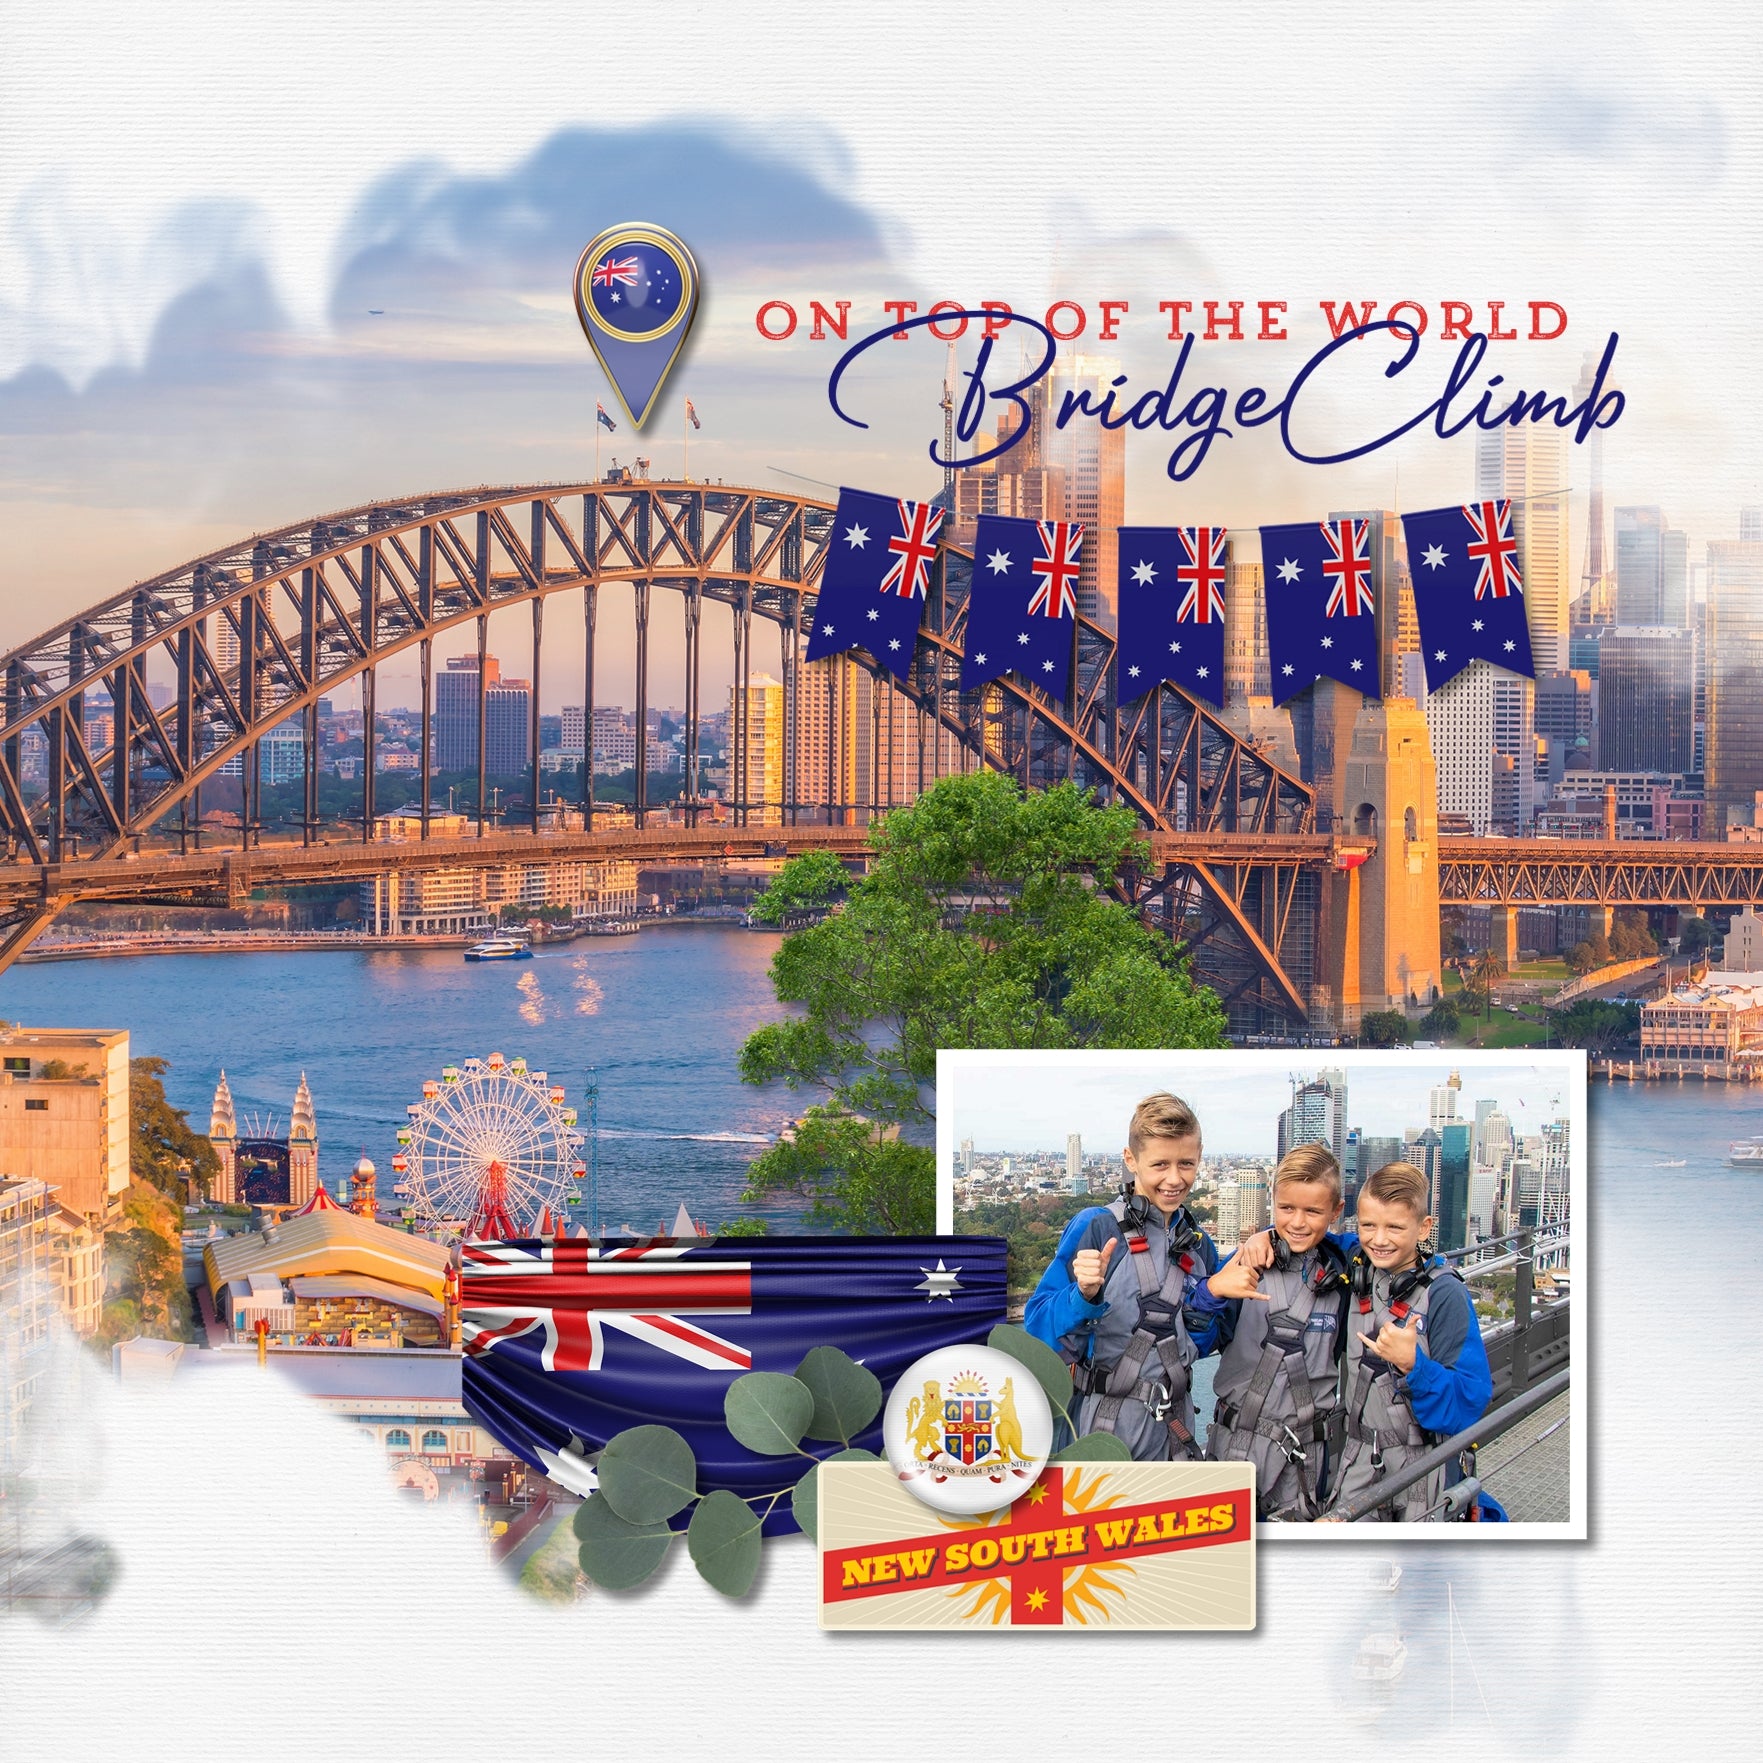 Highlight your vacation memories with these realistic digital scrapbooking art embellishments. Great for holidays and travel to Australia and exploring native and indigenous life! Embellishments include animal, crocodile, kangaroo, koala, balloons, bicycle, ornament, Devil's Stones, Devil's Marbles, banner, bunting, flag, location marker, pin, word bubble, medal, award, miner hat, passport, rugby, suitcase, boomerang, more.